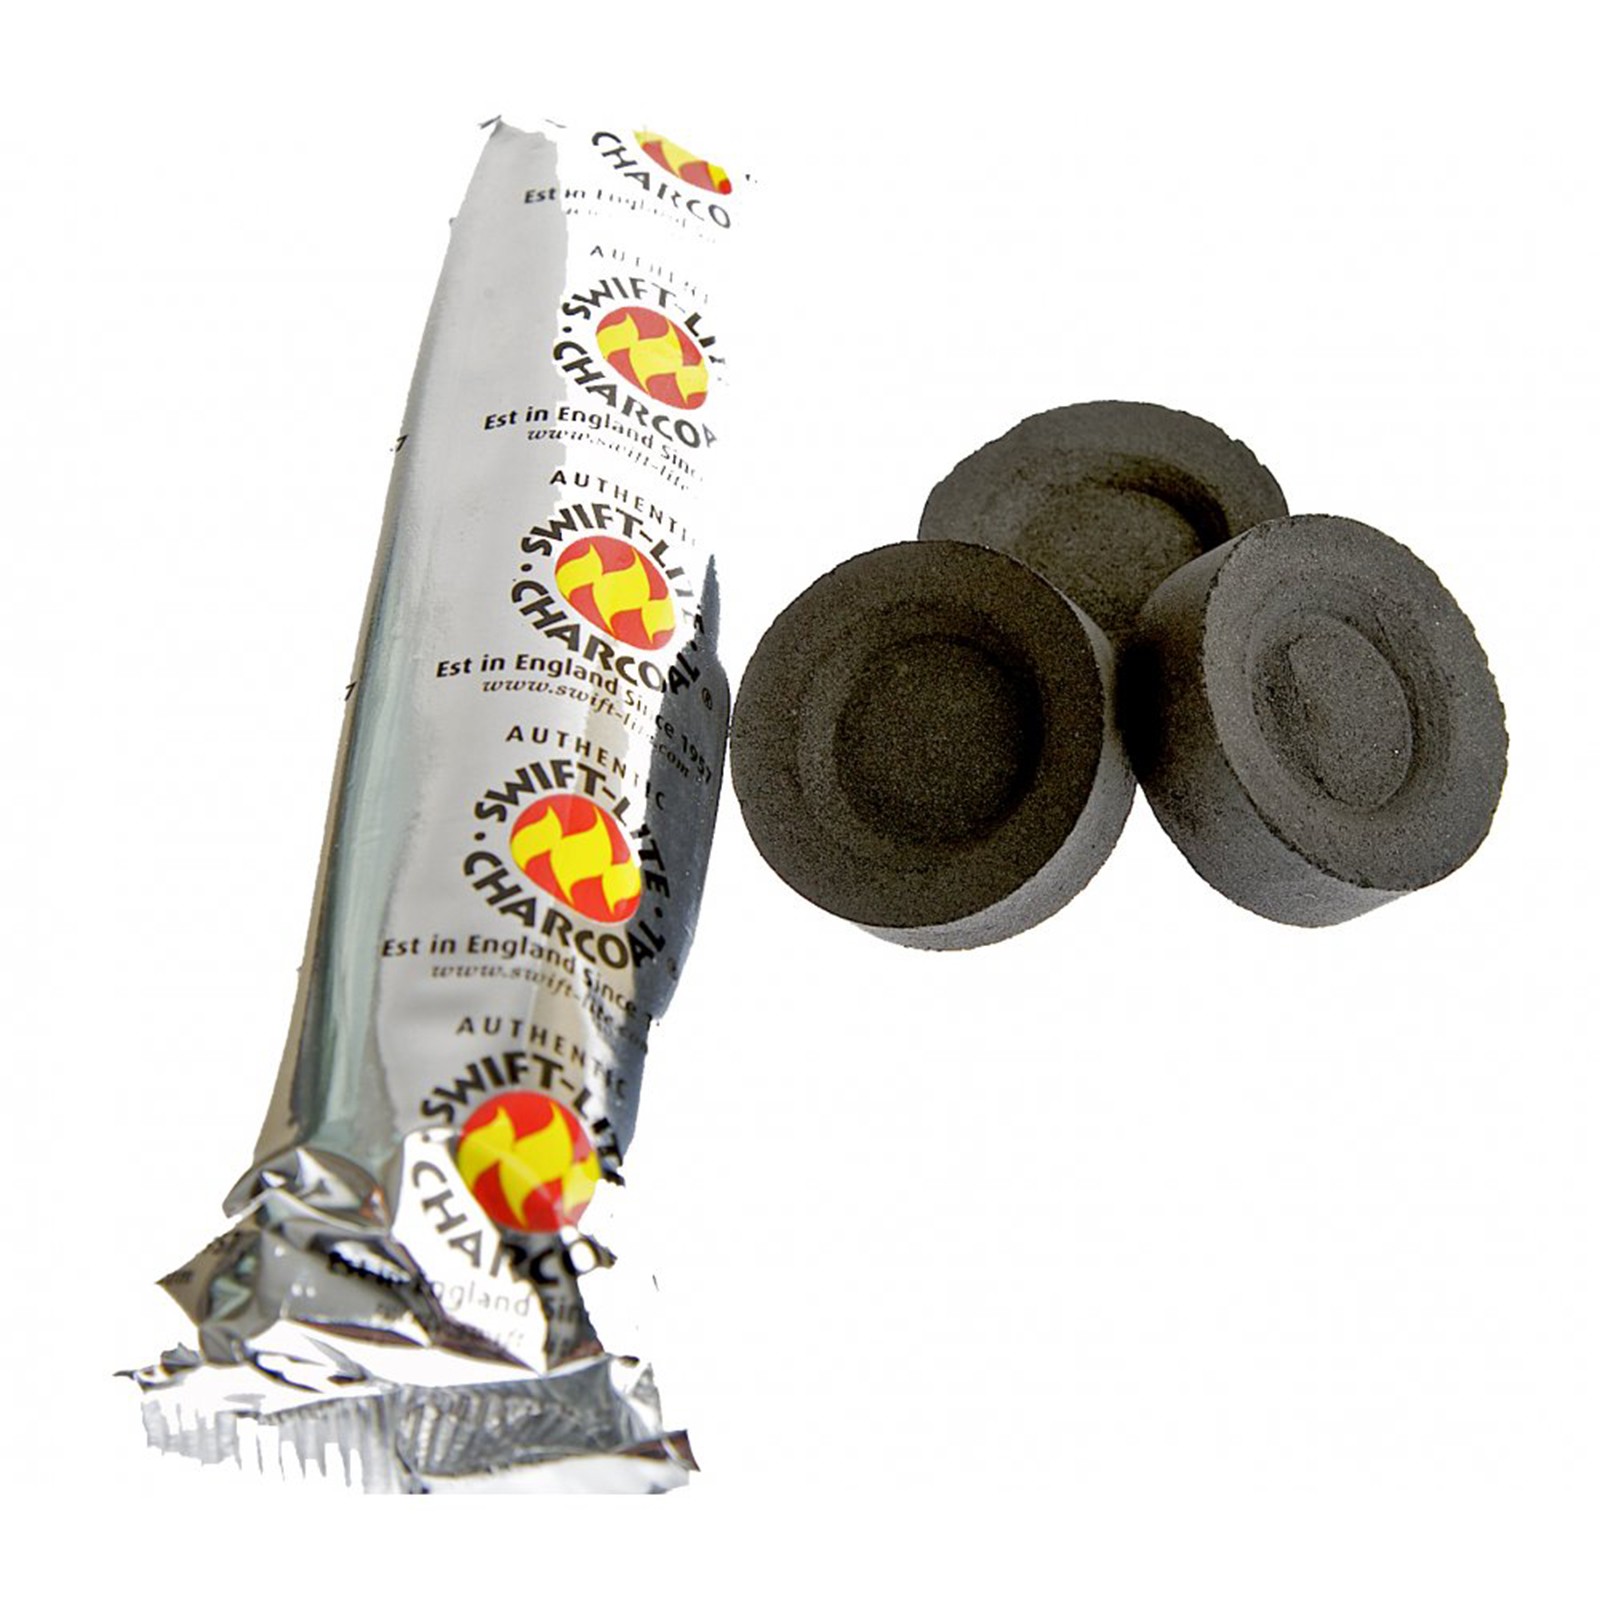 Charcoal Discs, Tablets For Burning Resin Incense